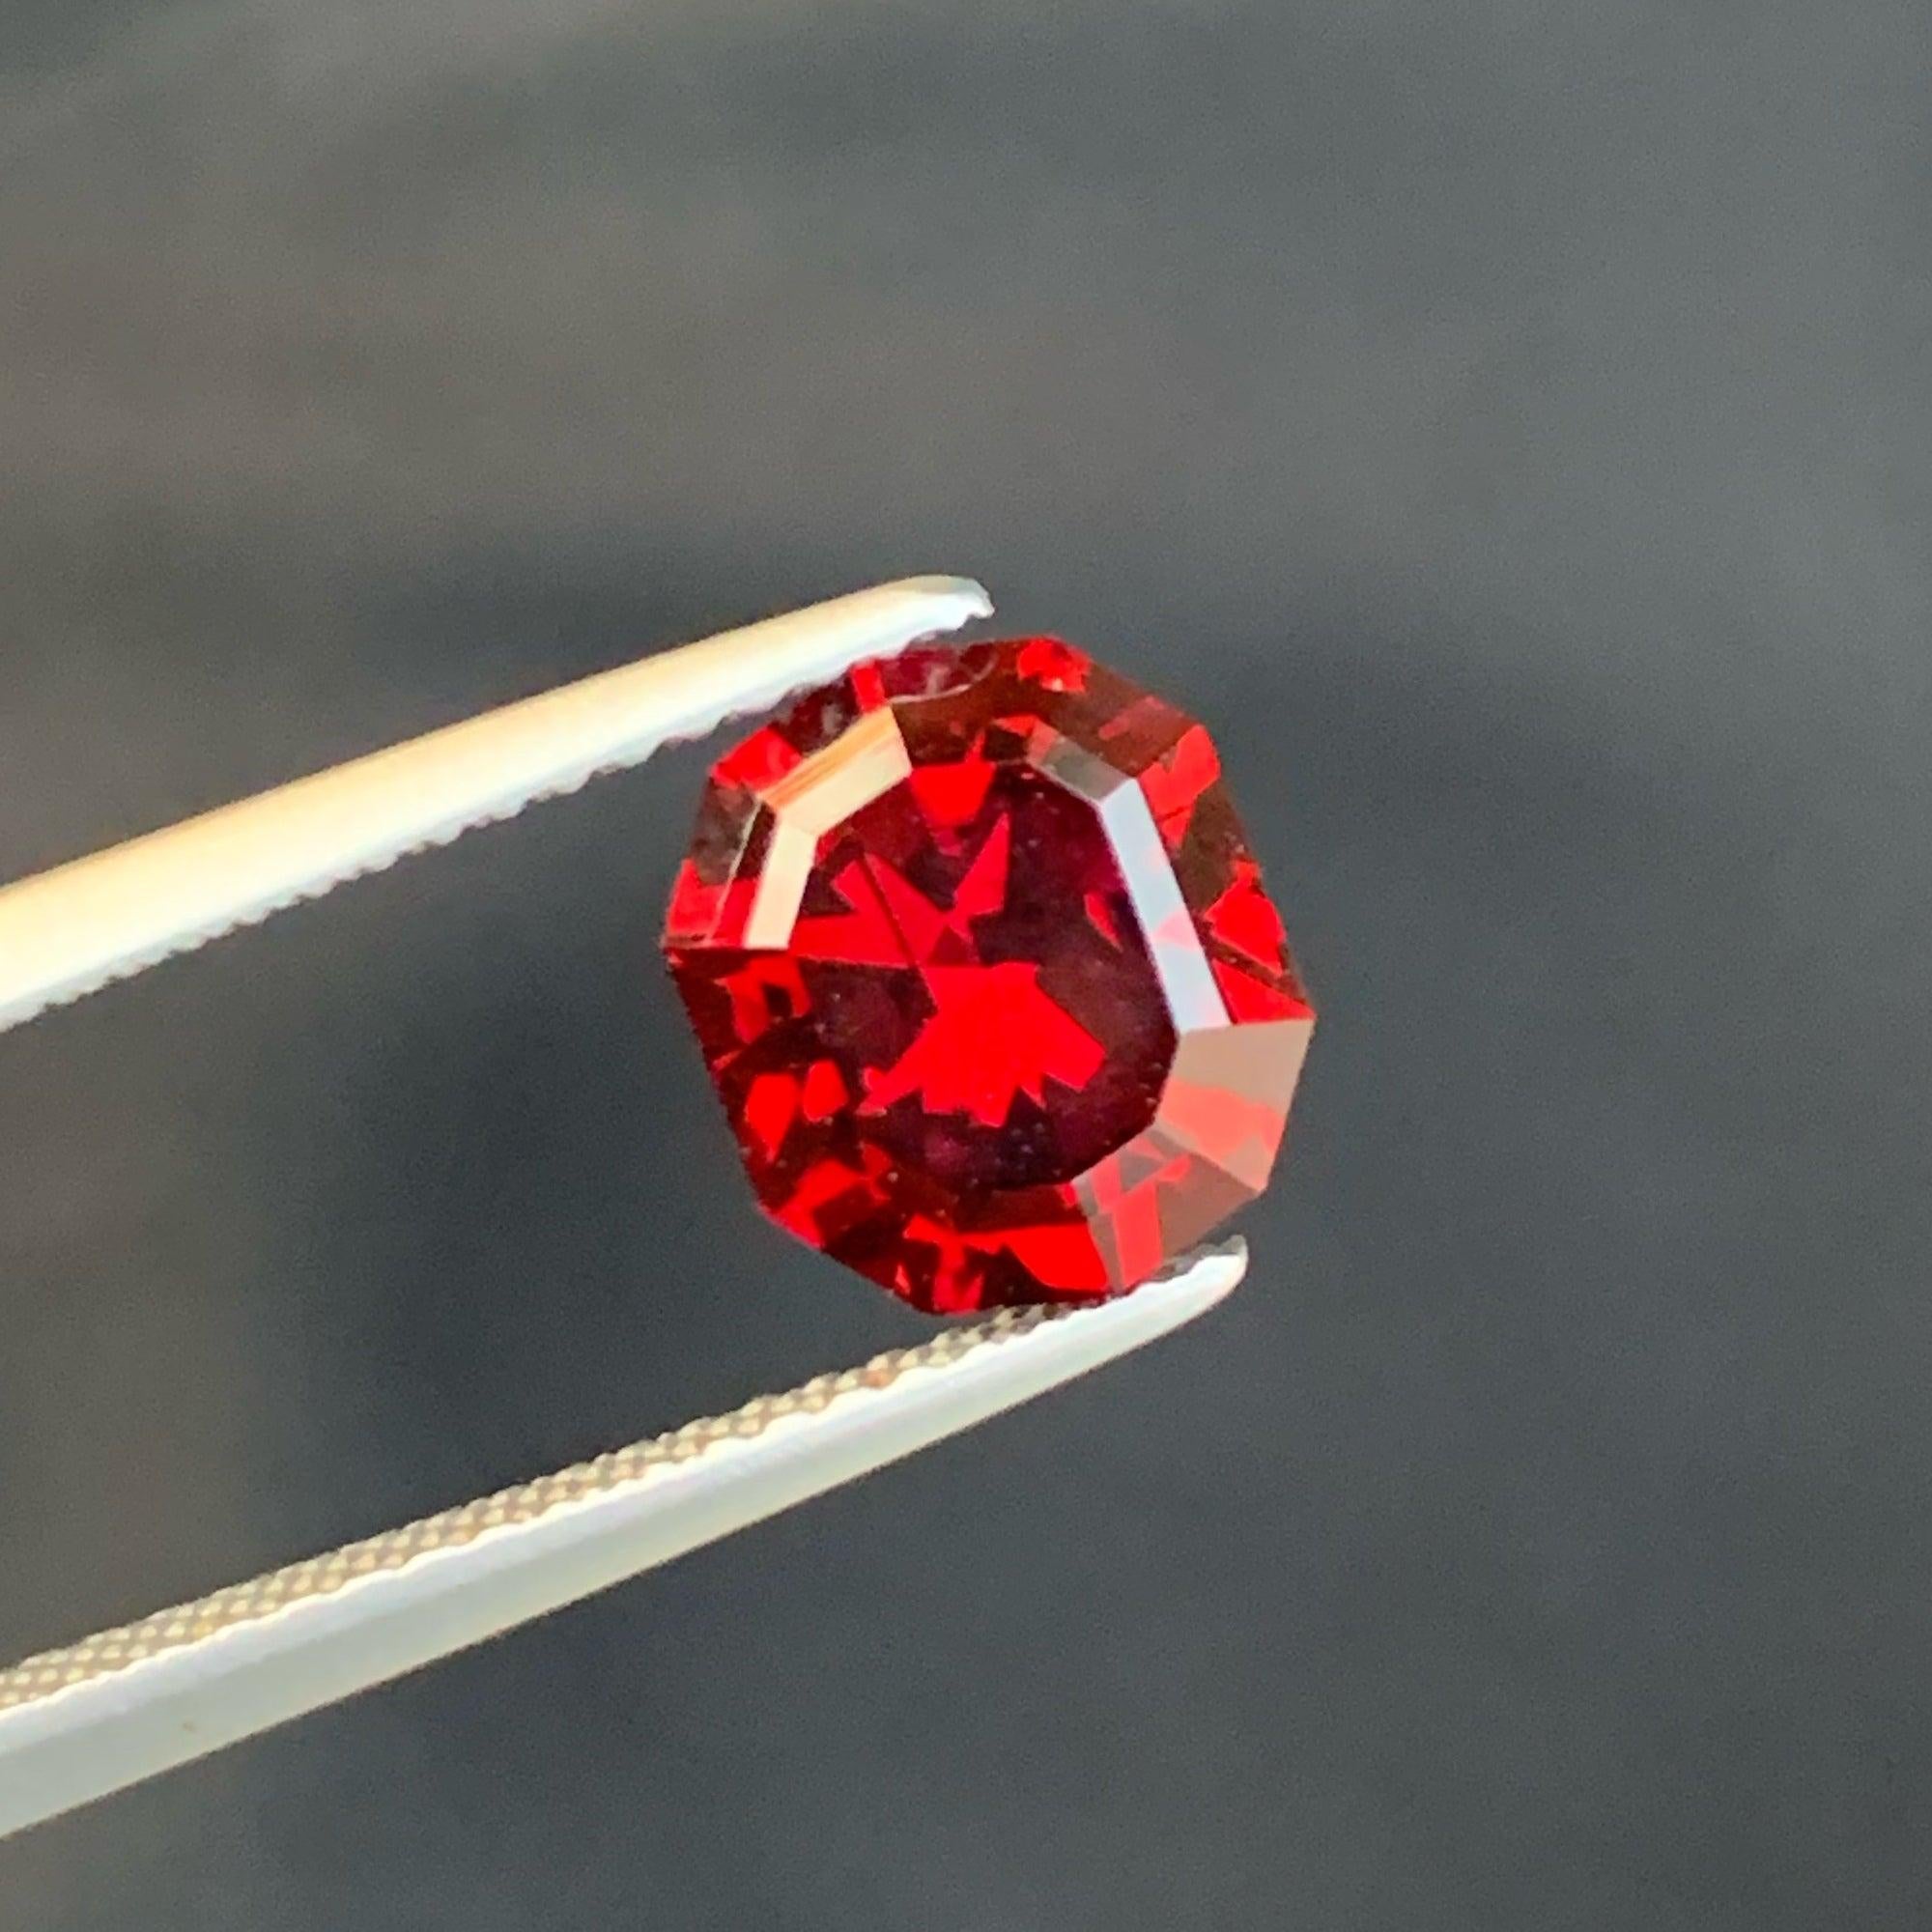 Beautiful Bright Red Natural Garnet Gemstone of 2.80 carats from Malawi has a wonderful cut in a Decagon shape, incredible Red color, Great brilliance. This gem is totally Eye-Clean Clarity.

 

Product Information:
GEMSTONE NAME: Beautiful Bright